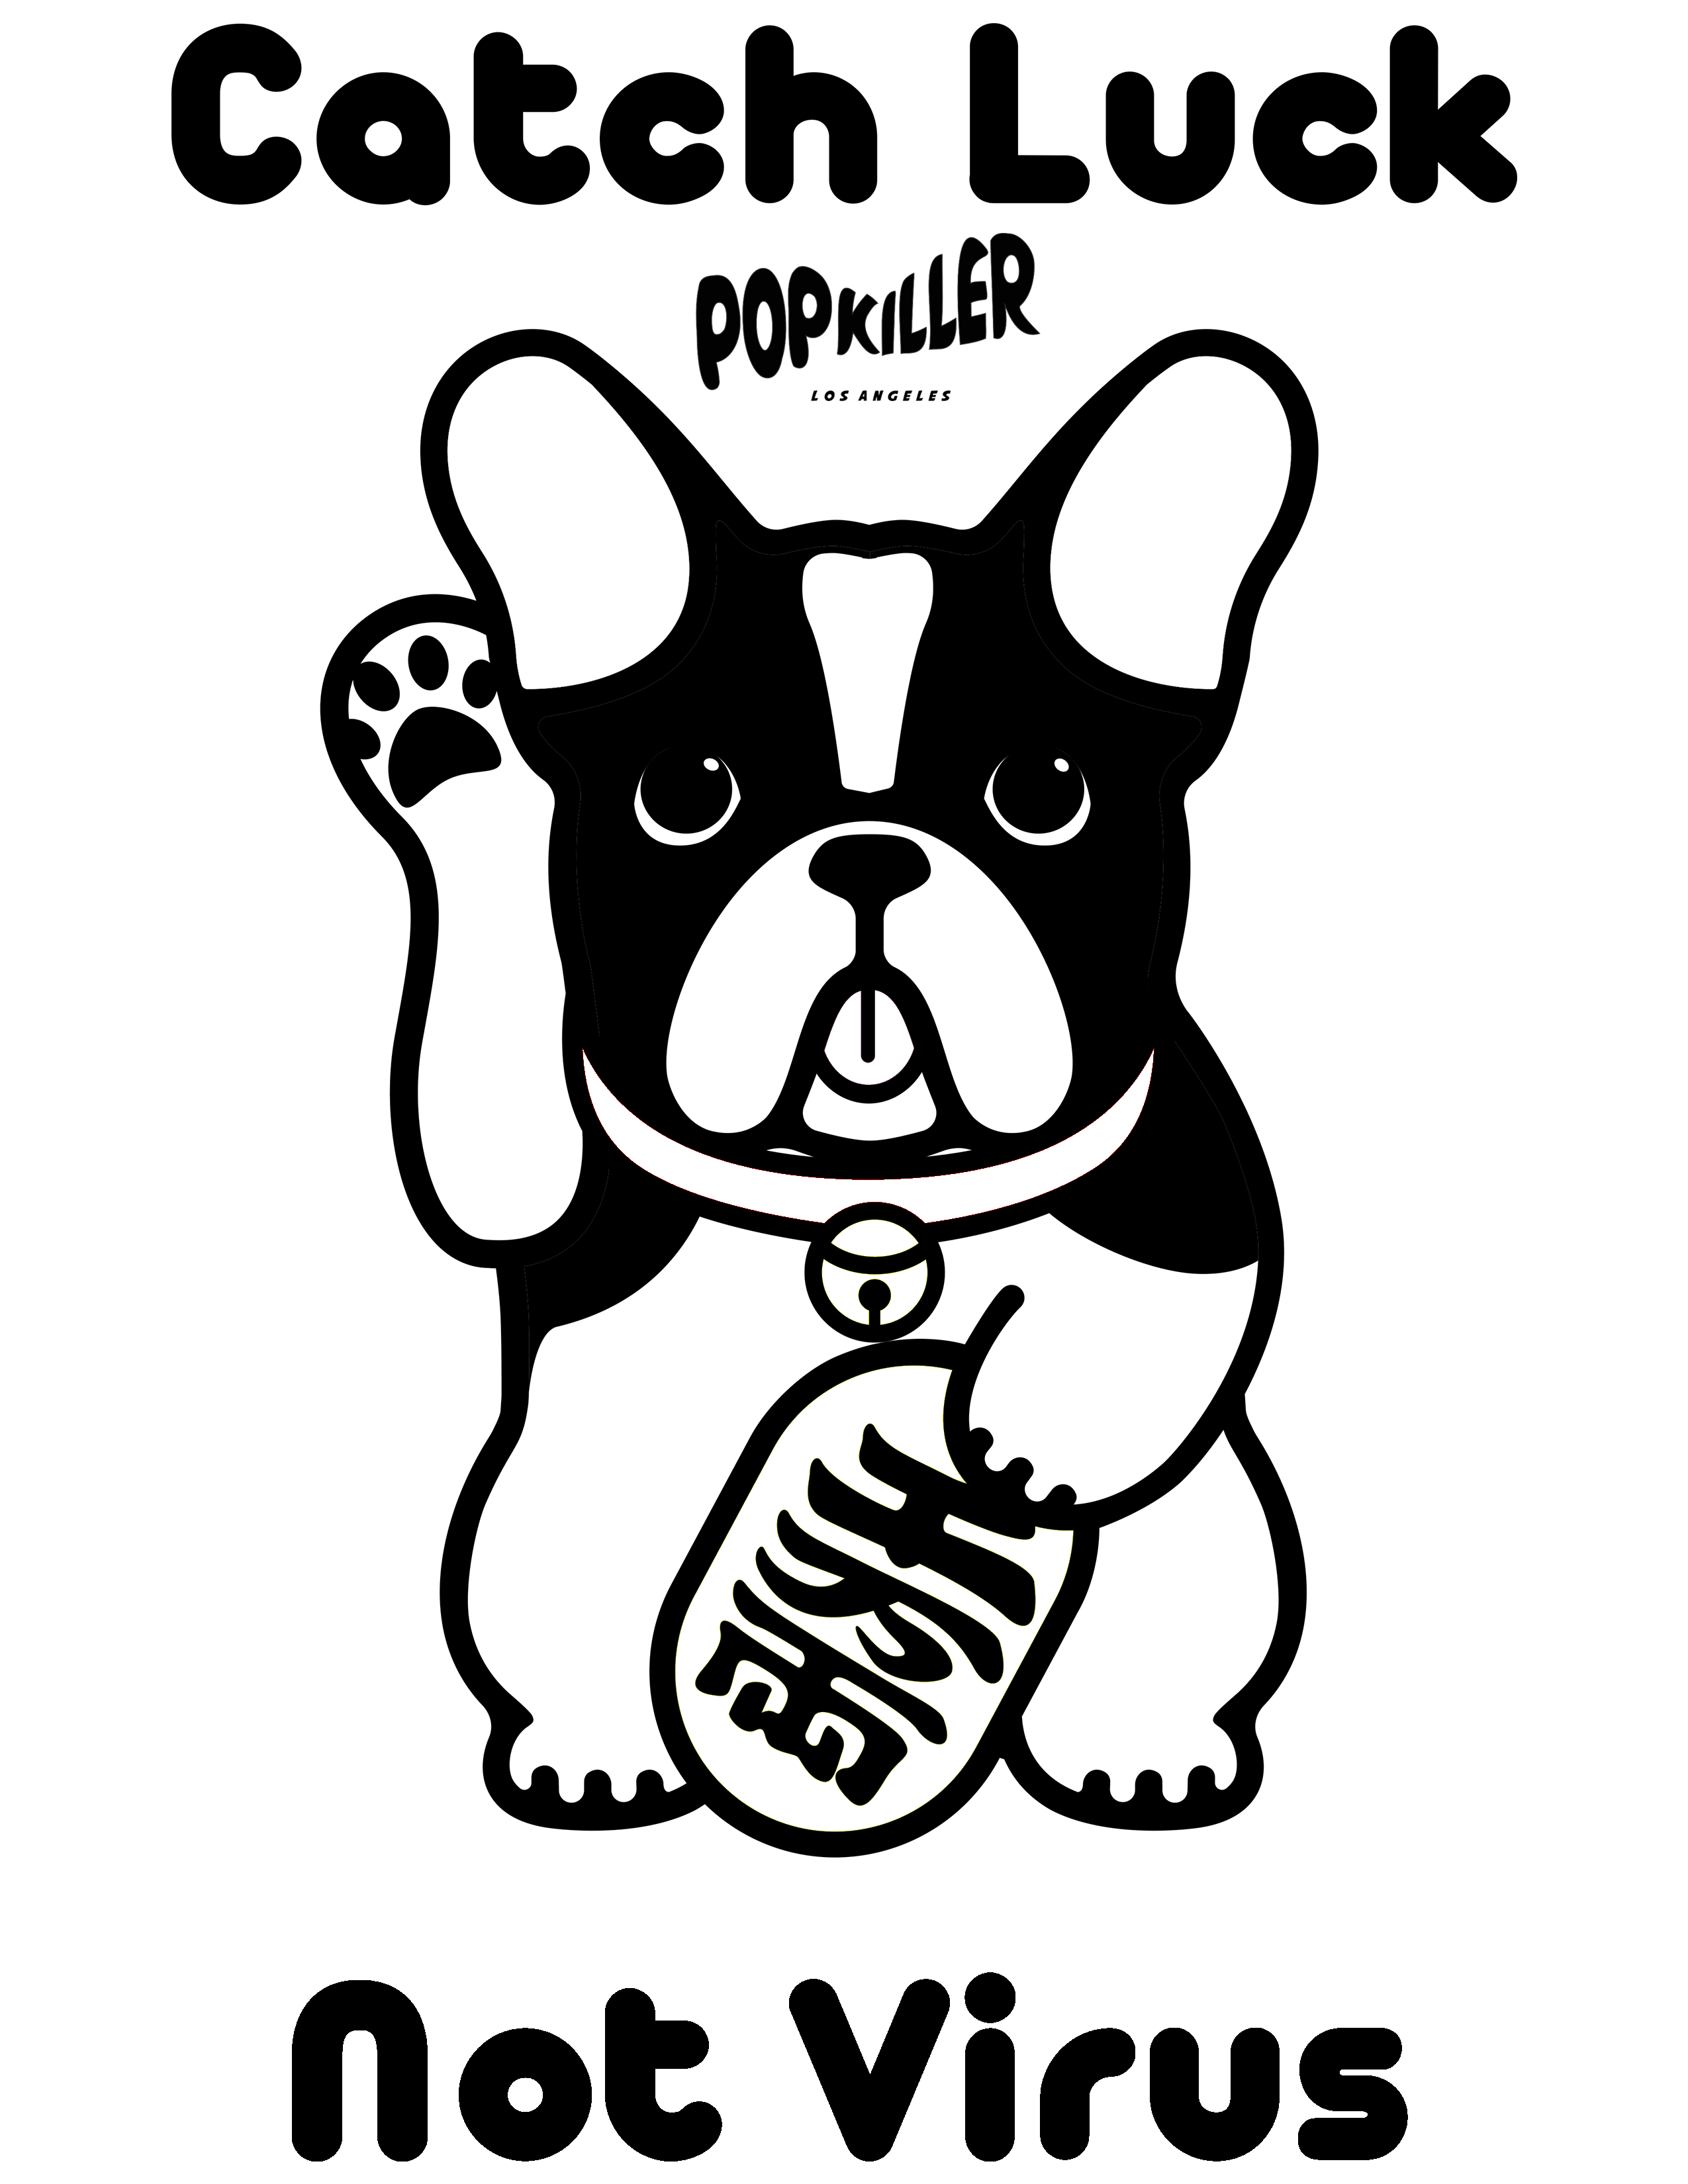 Popkiller Catch Luck Coloring Page